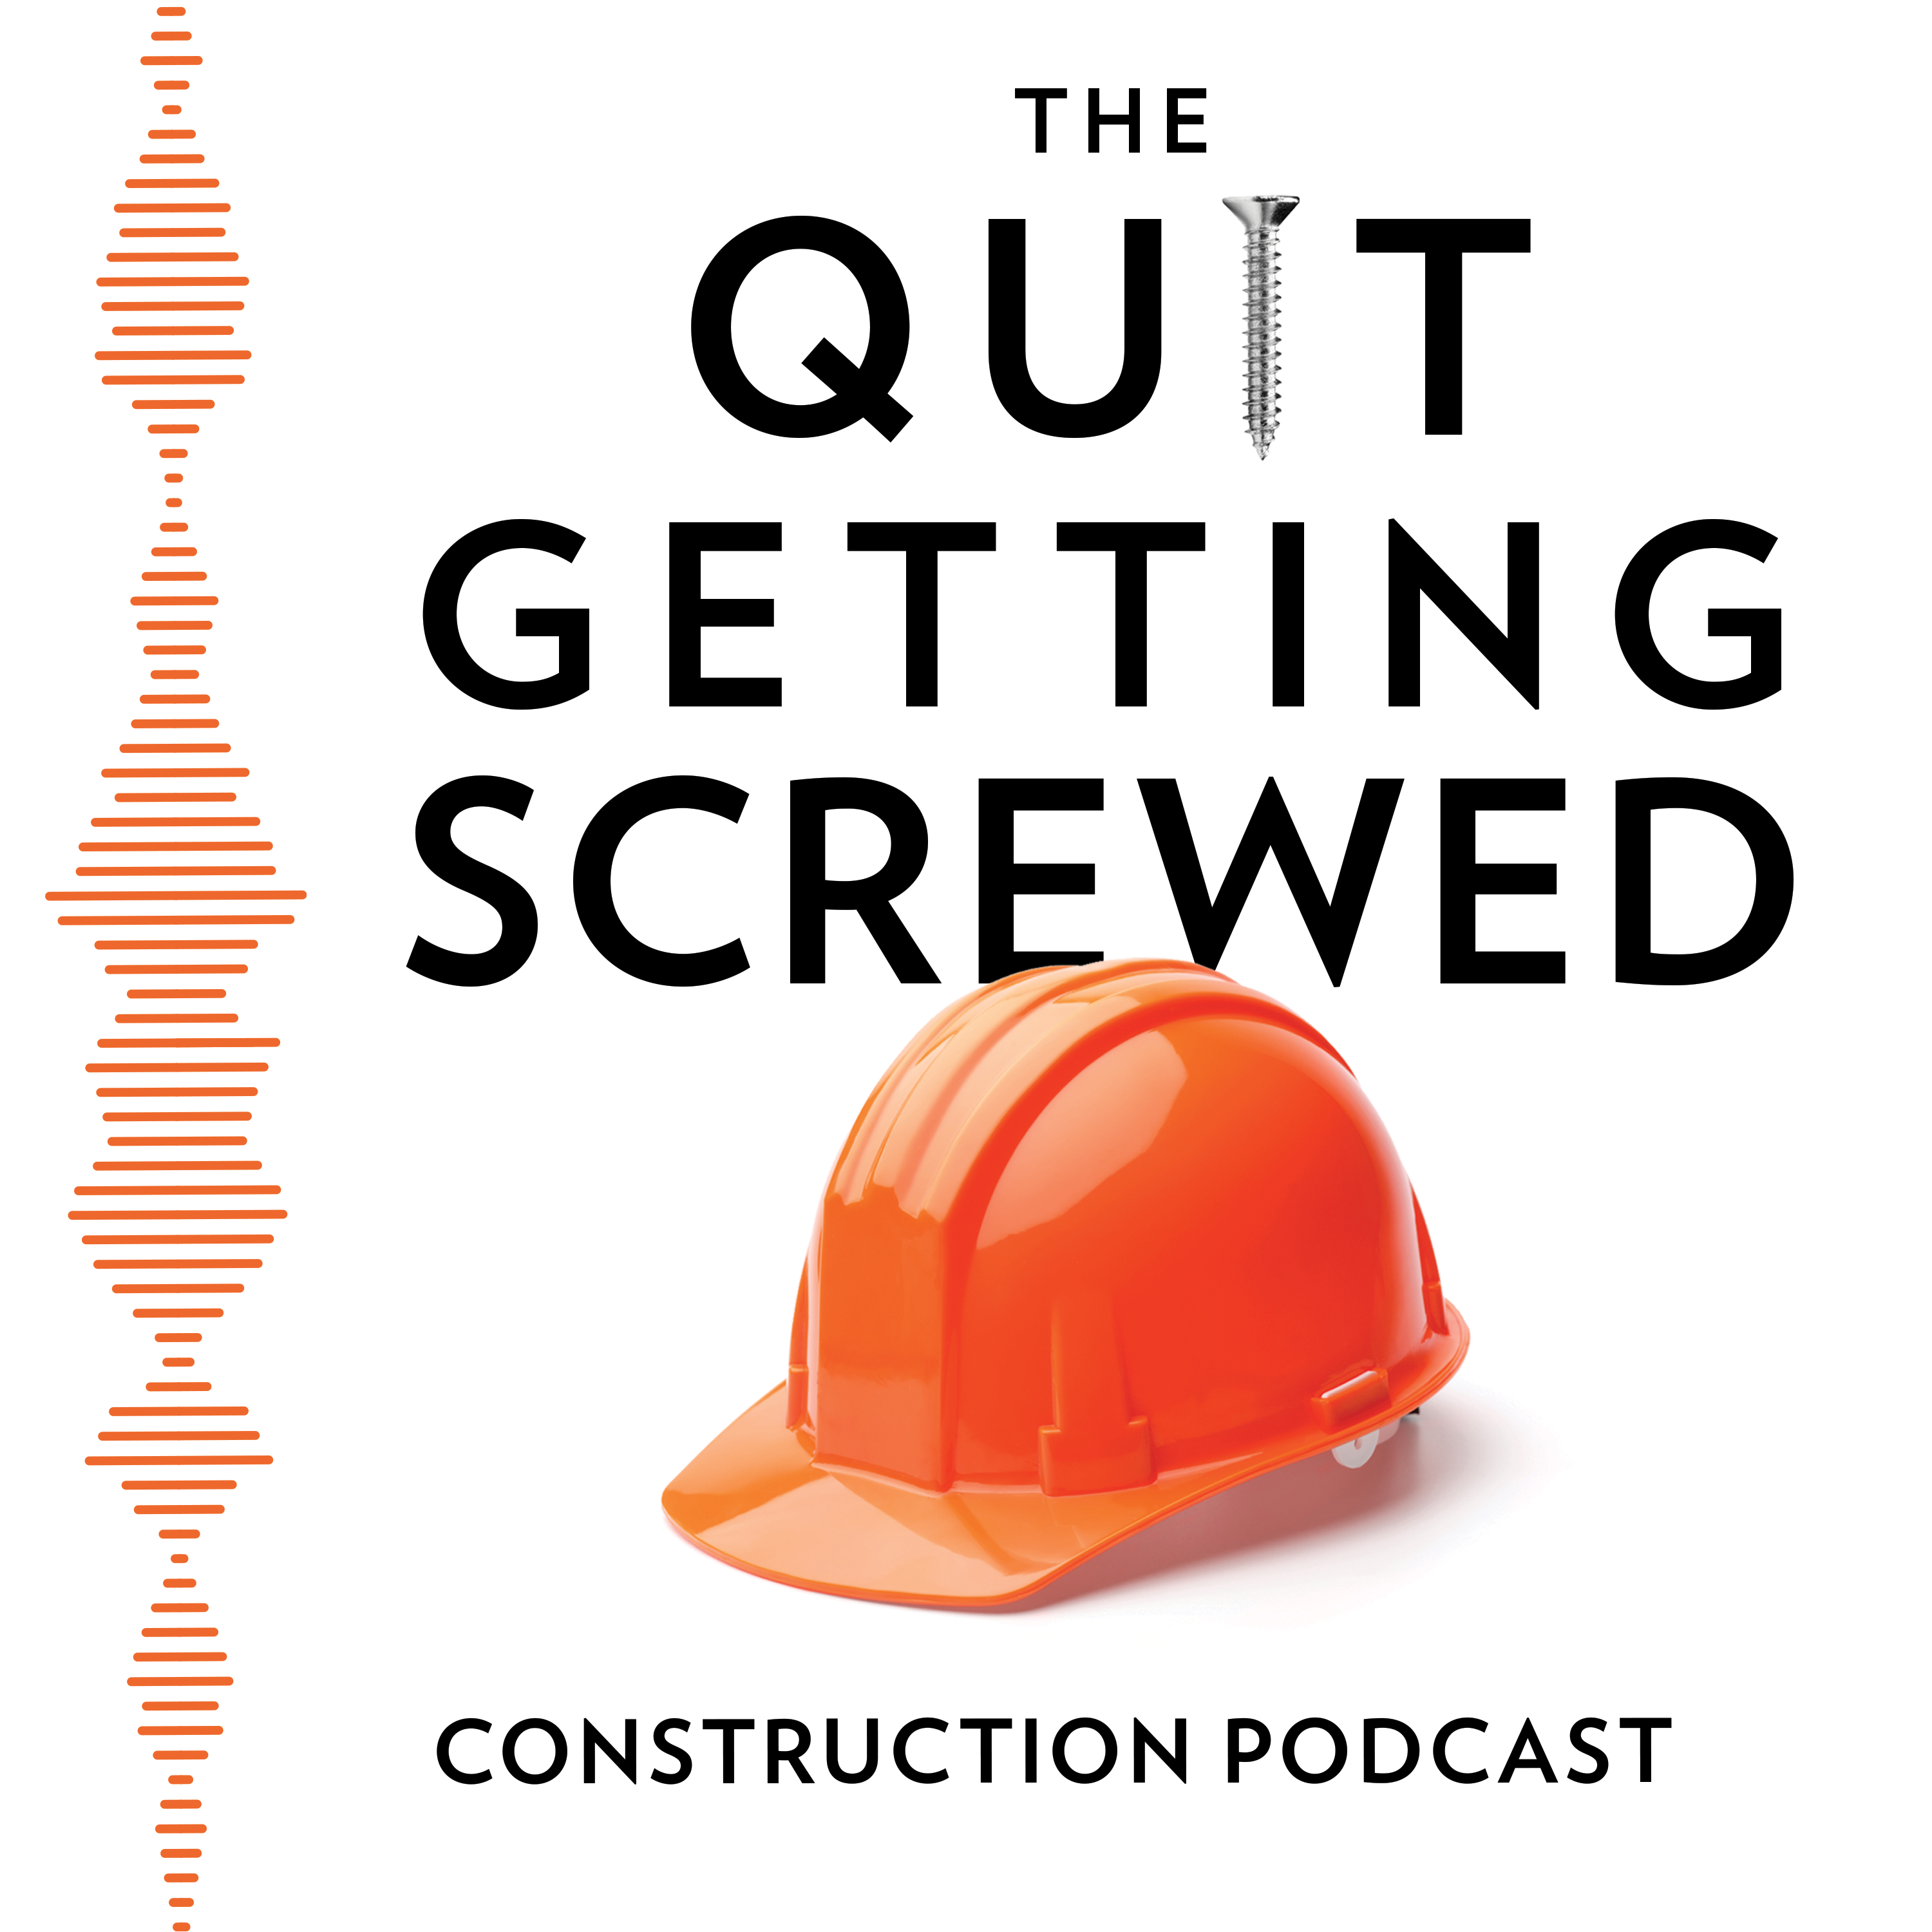 Episode 75: How to Build a Career in Occupational Safety and Health with Ernie Smith